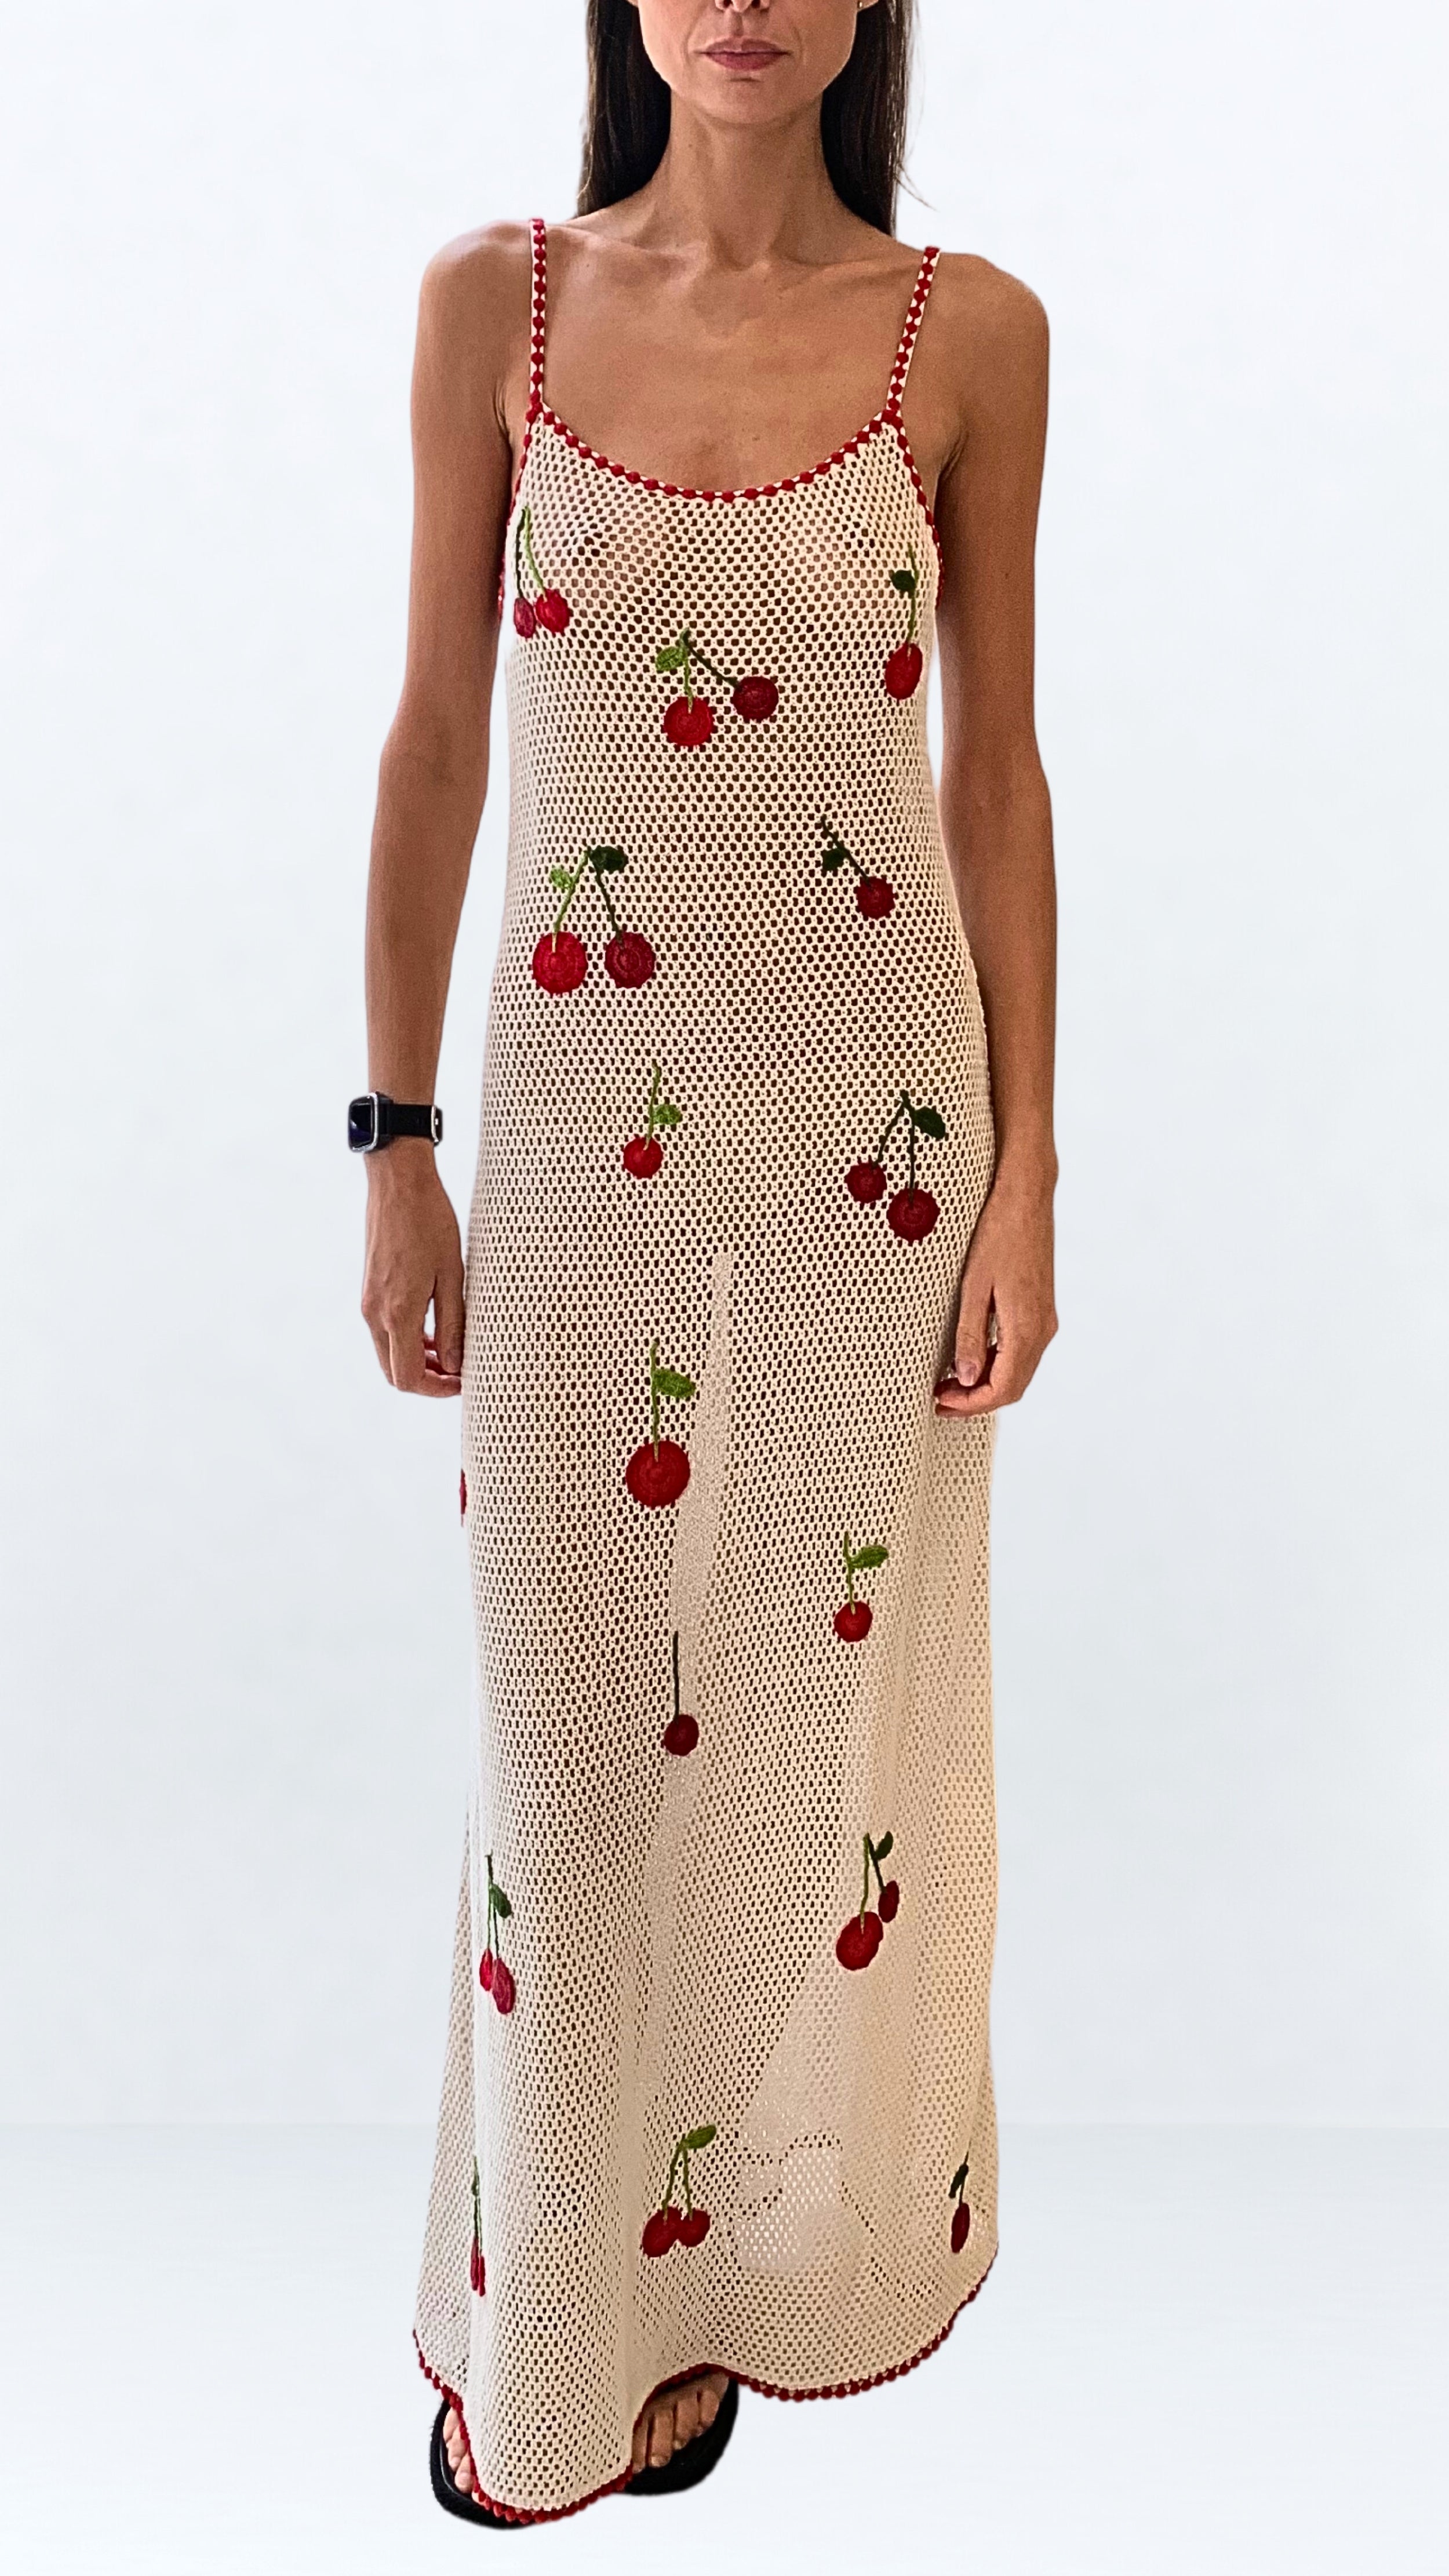 Leslie Amon Treasure Cherry Dress Maxi in White. Crochet knit cotton dress with playful cherry embroidery. Spaghetti strap sleeves in a red ribbon. Maxi length. Shown on model facing front.